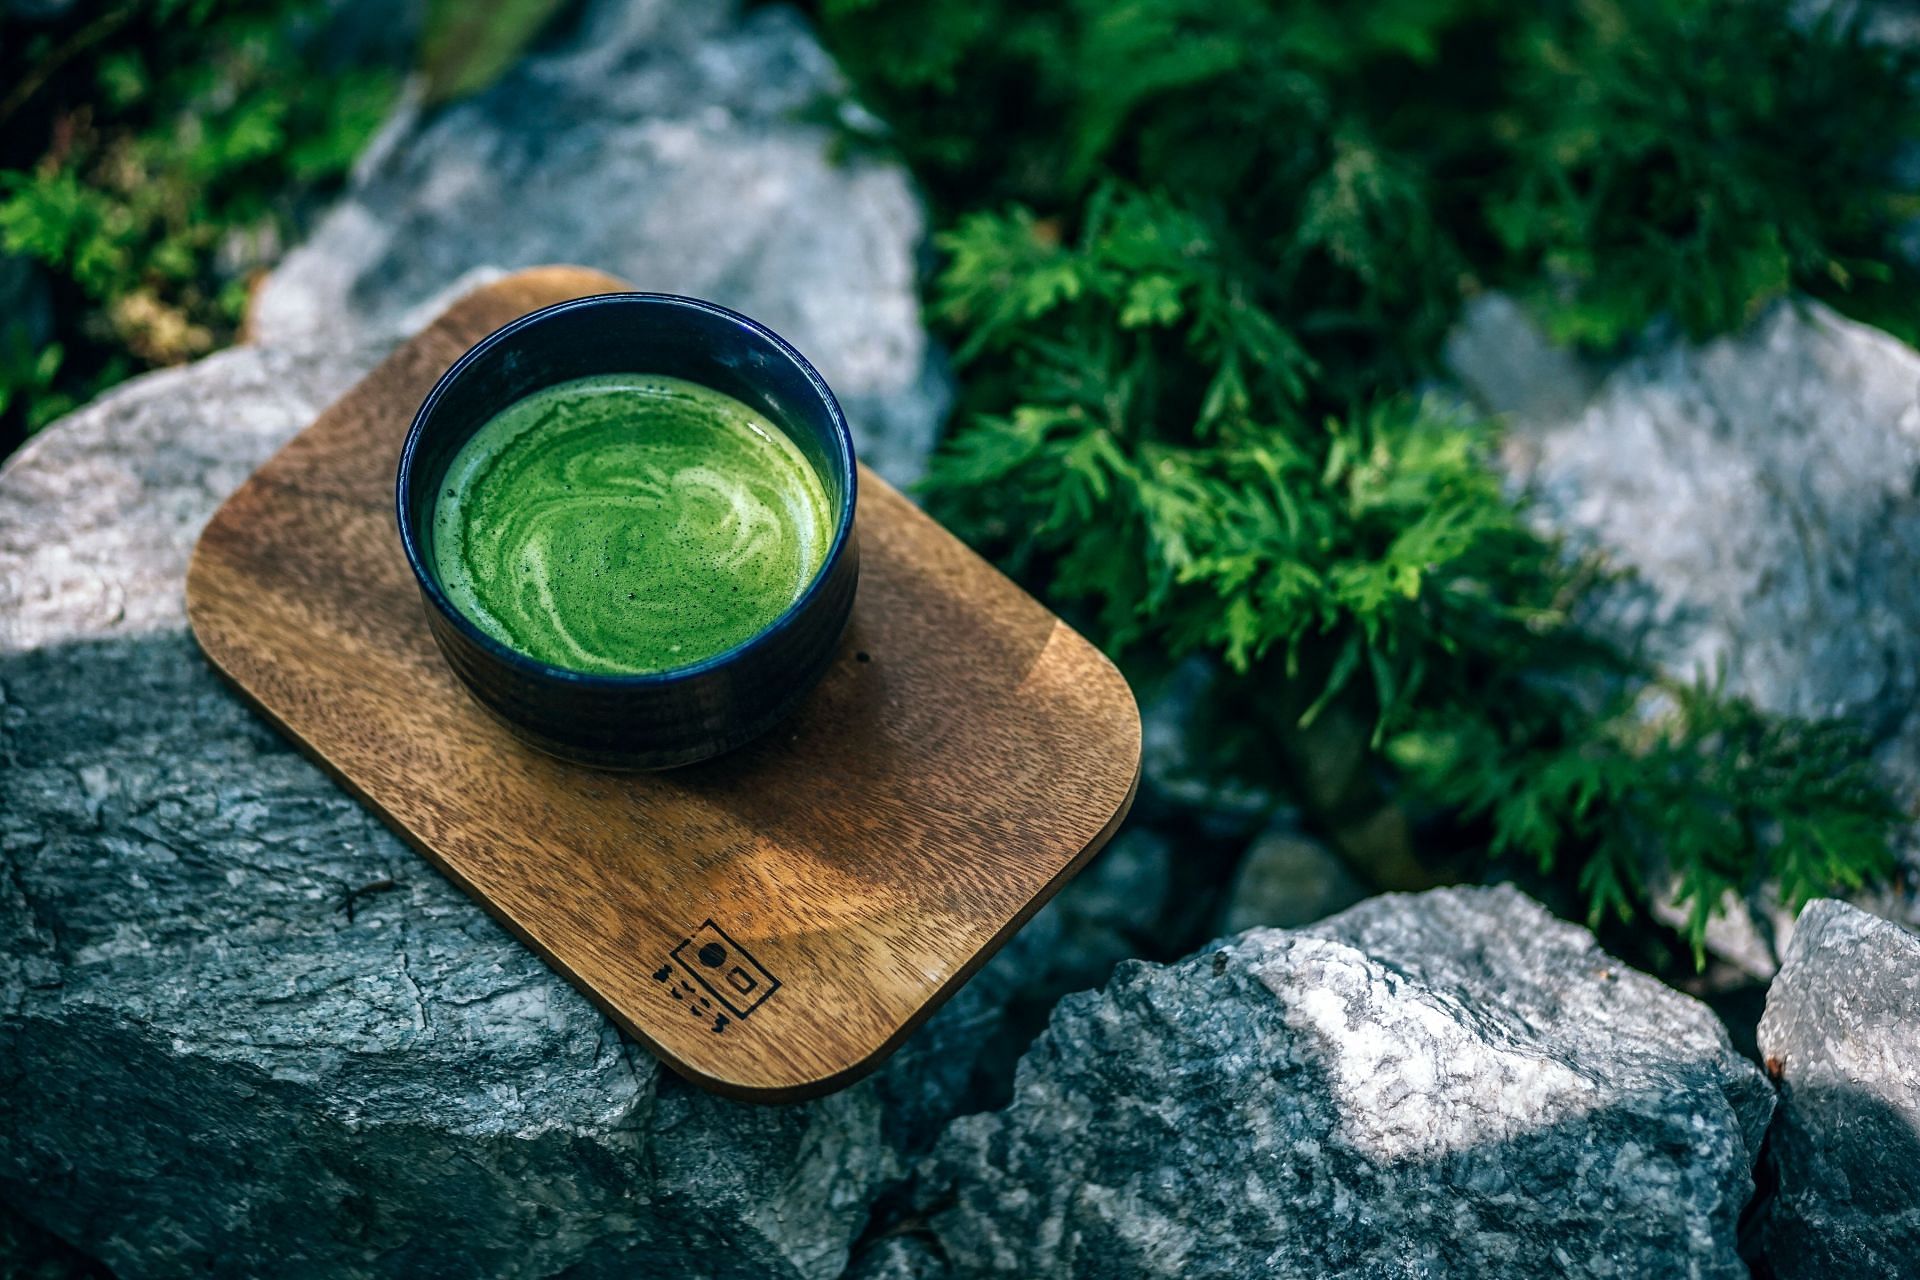 Wheatgrass powder can reduce the risk of cancer (image sourced via Unsplash / Photo by Nipana lifestyle)